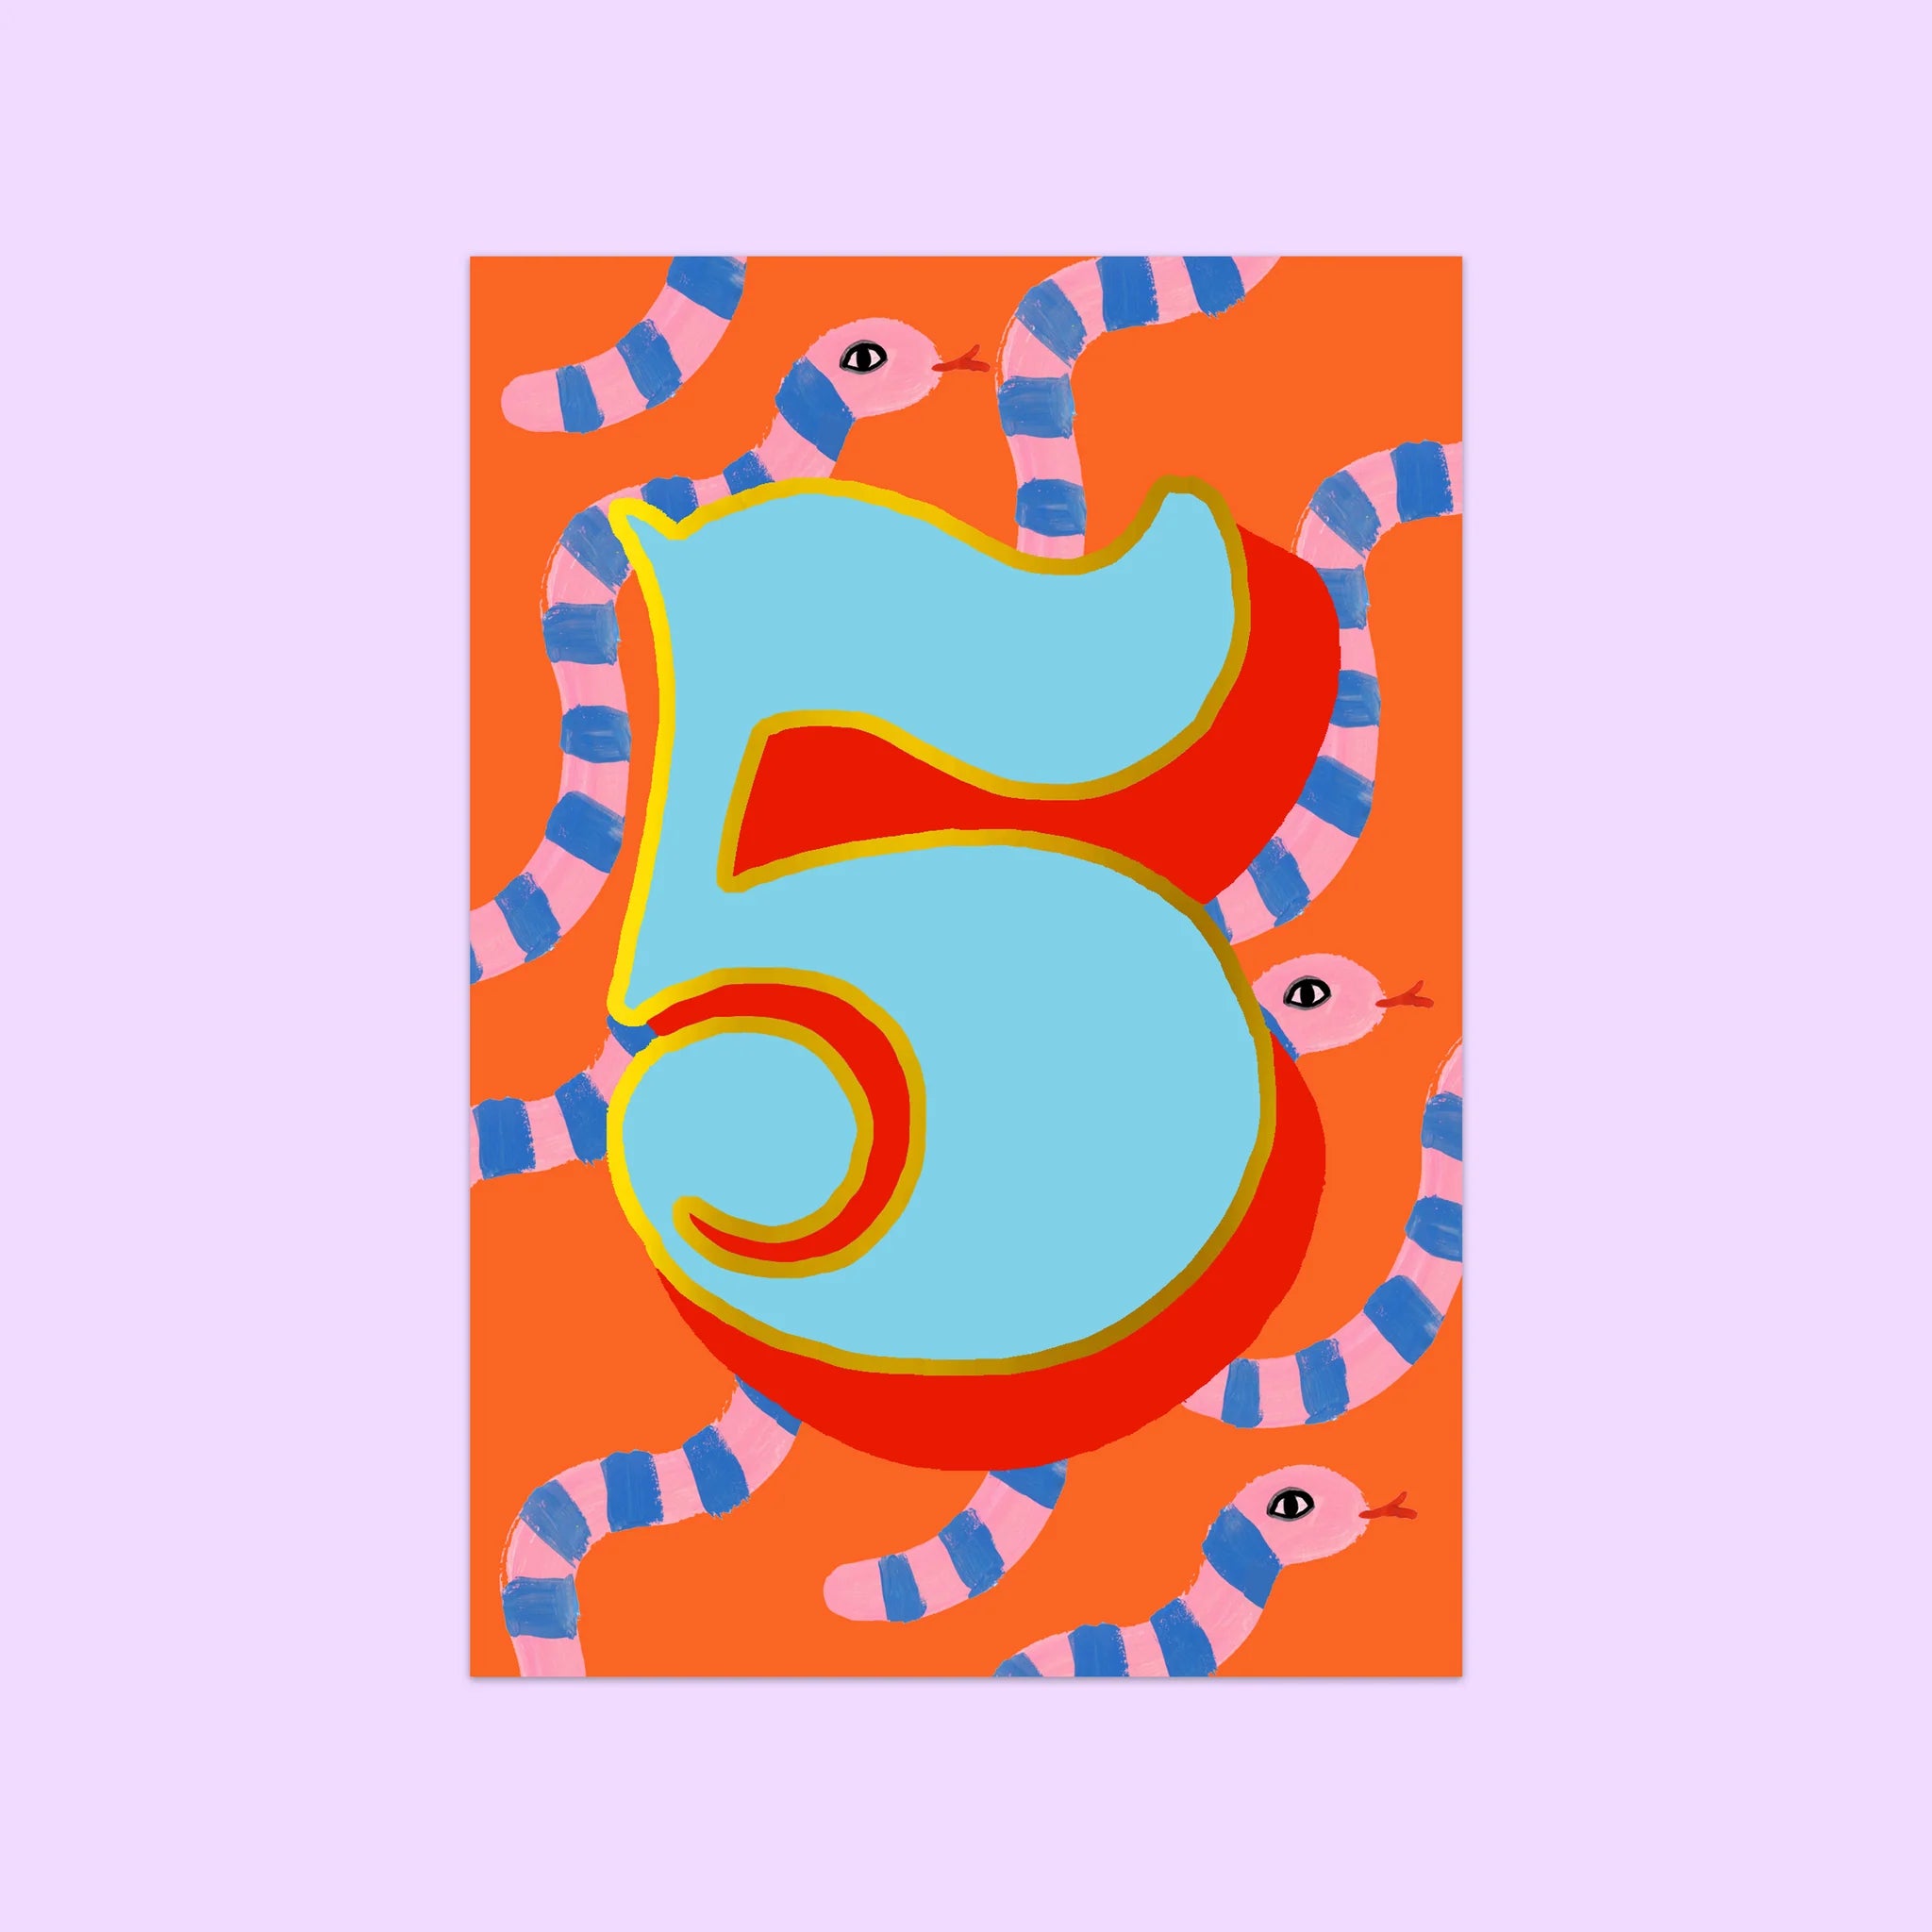 AGE 5 (SNAKES) | CARD BY ELEANOR BOWMER